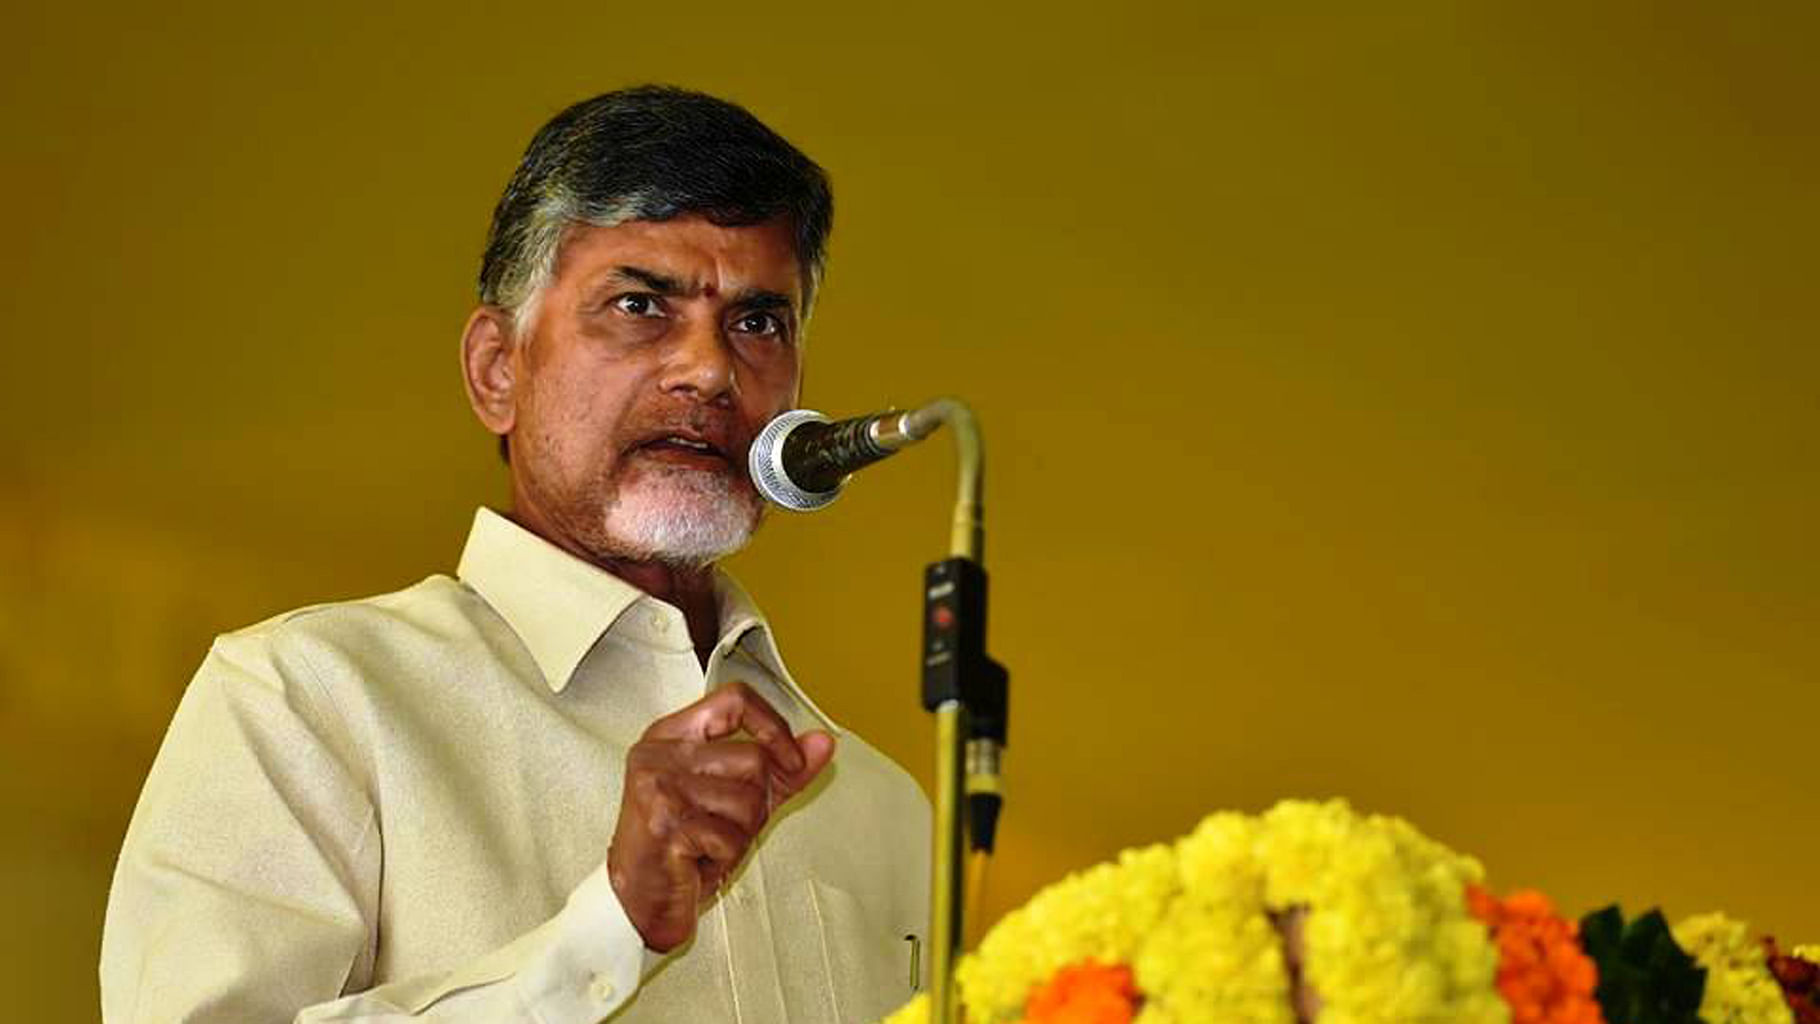 Andhra Pradesh Chief Minister N Chandrababu Naidu on Friday directed five questions to BJP President Amit Shah.